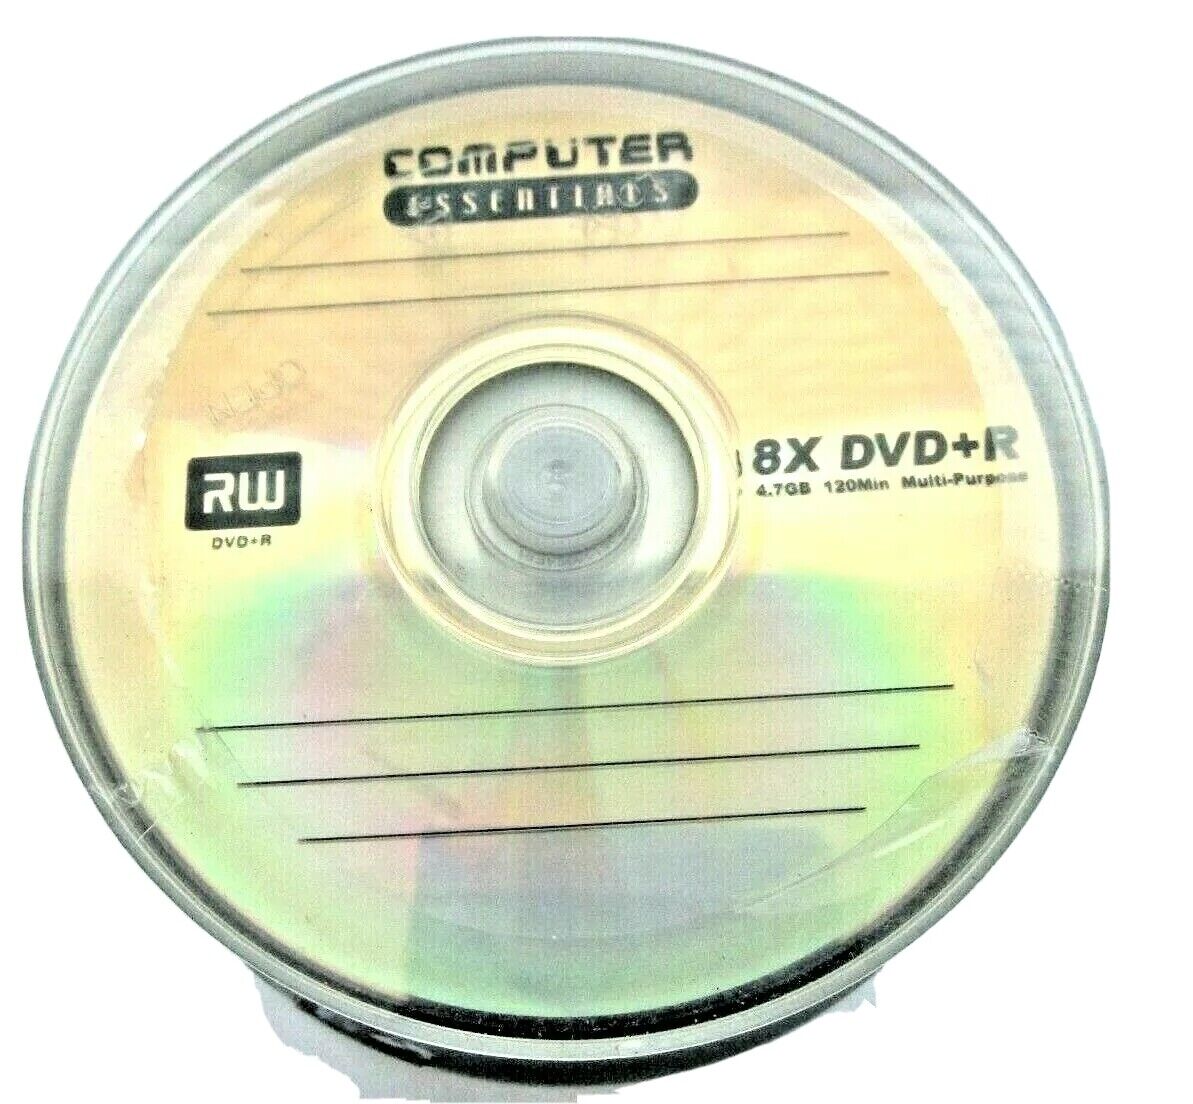 DVD-R 25 Pack Computer Essentials New Sealed